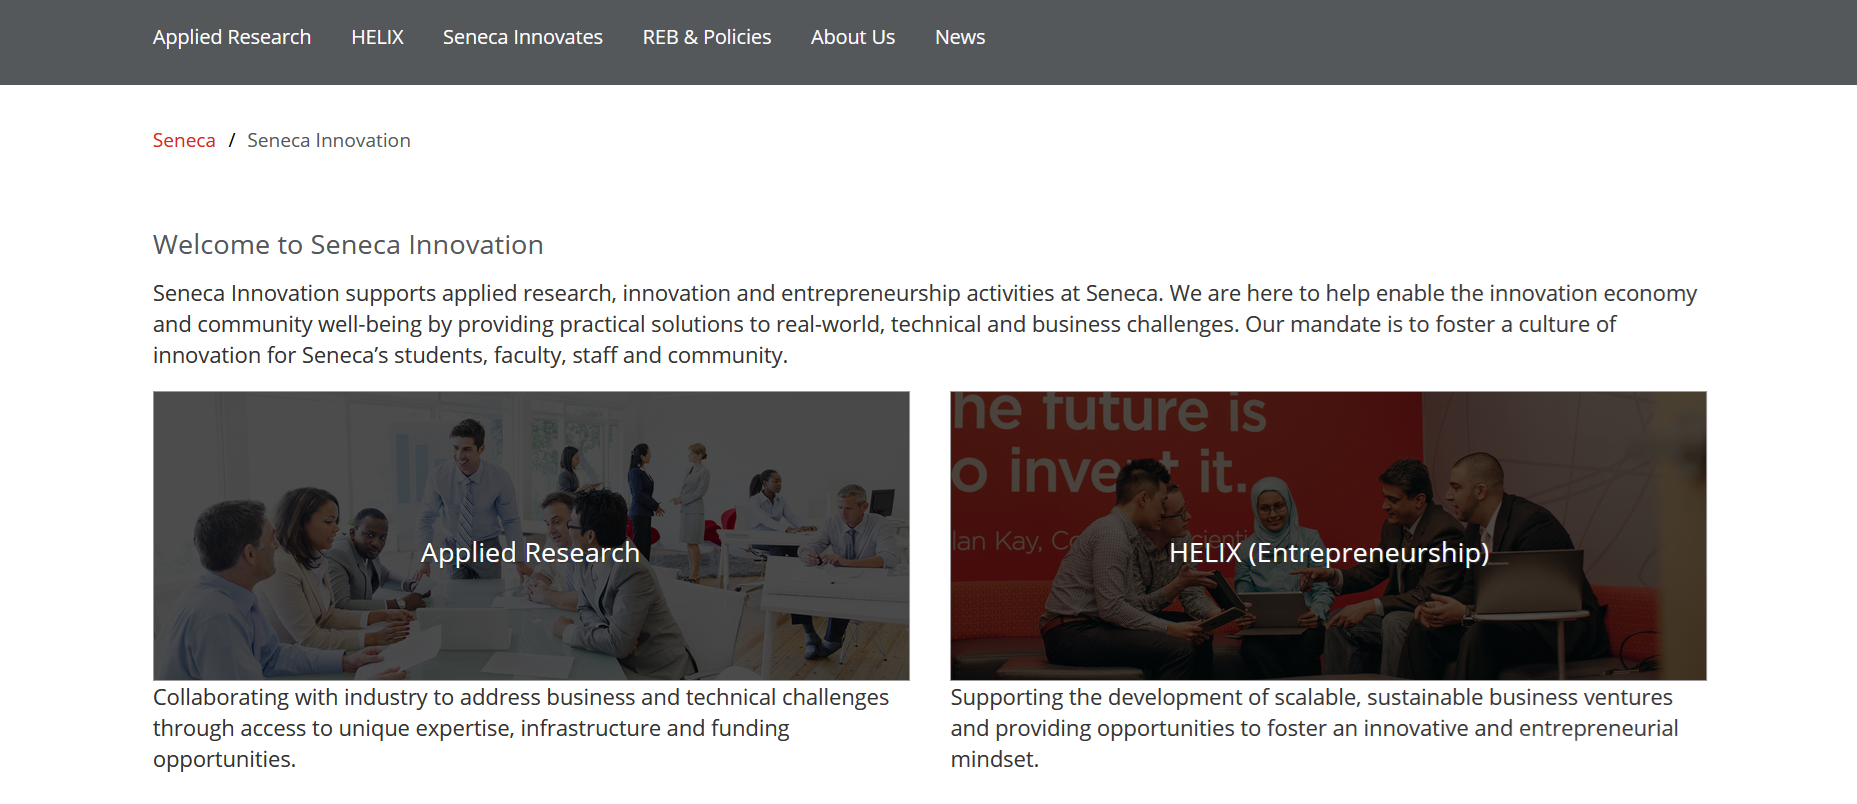 A screencapture of the new Seneca Innovation website, available at http://www.senecacollege.ca/innovation